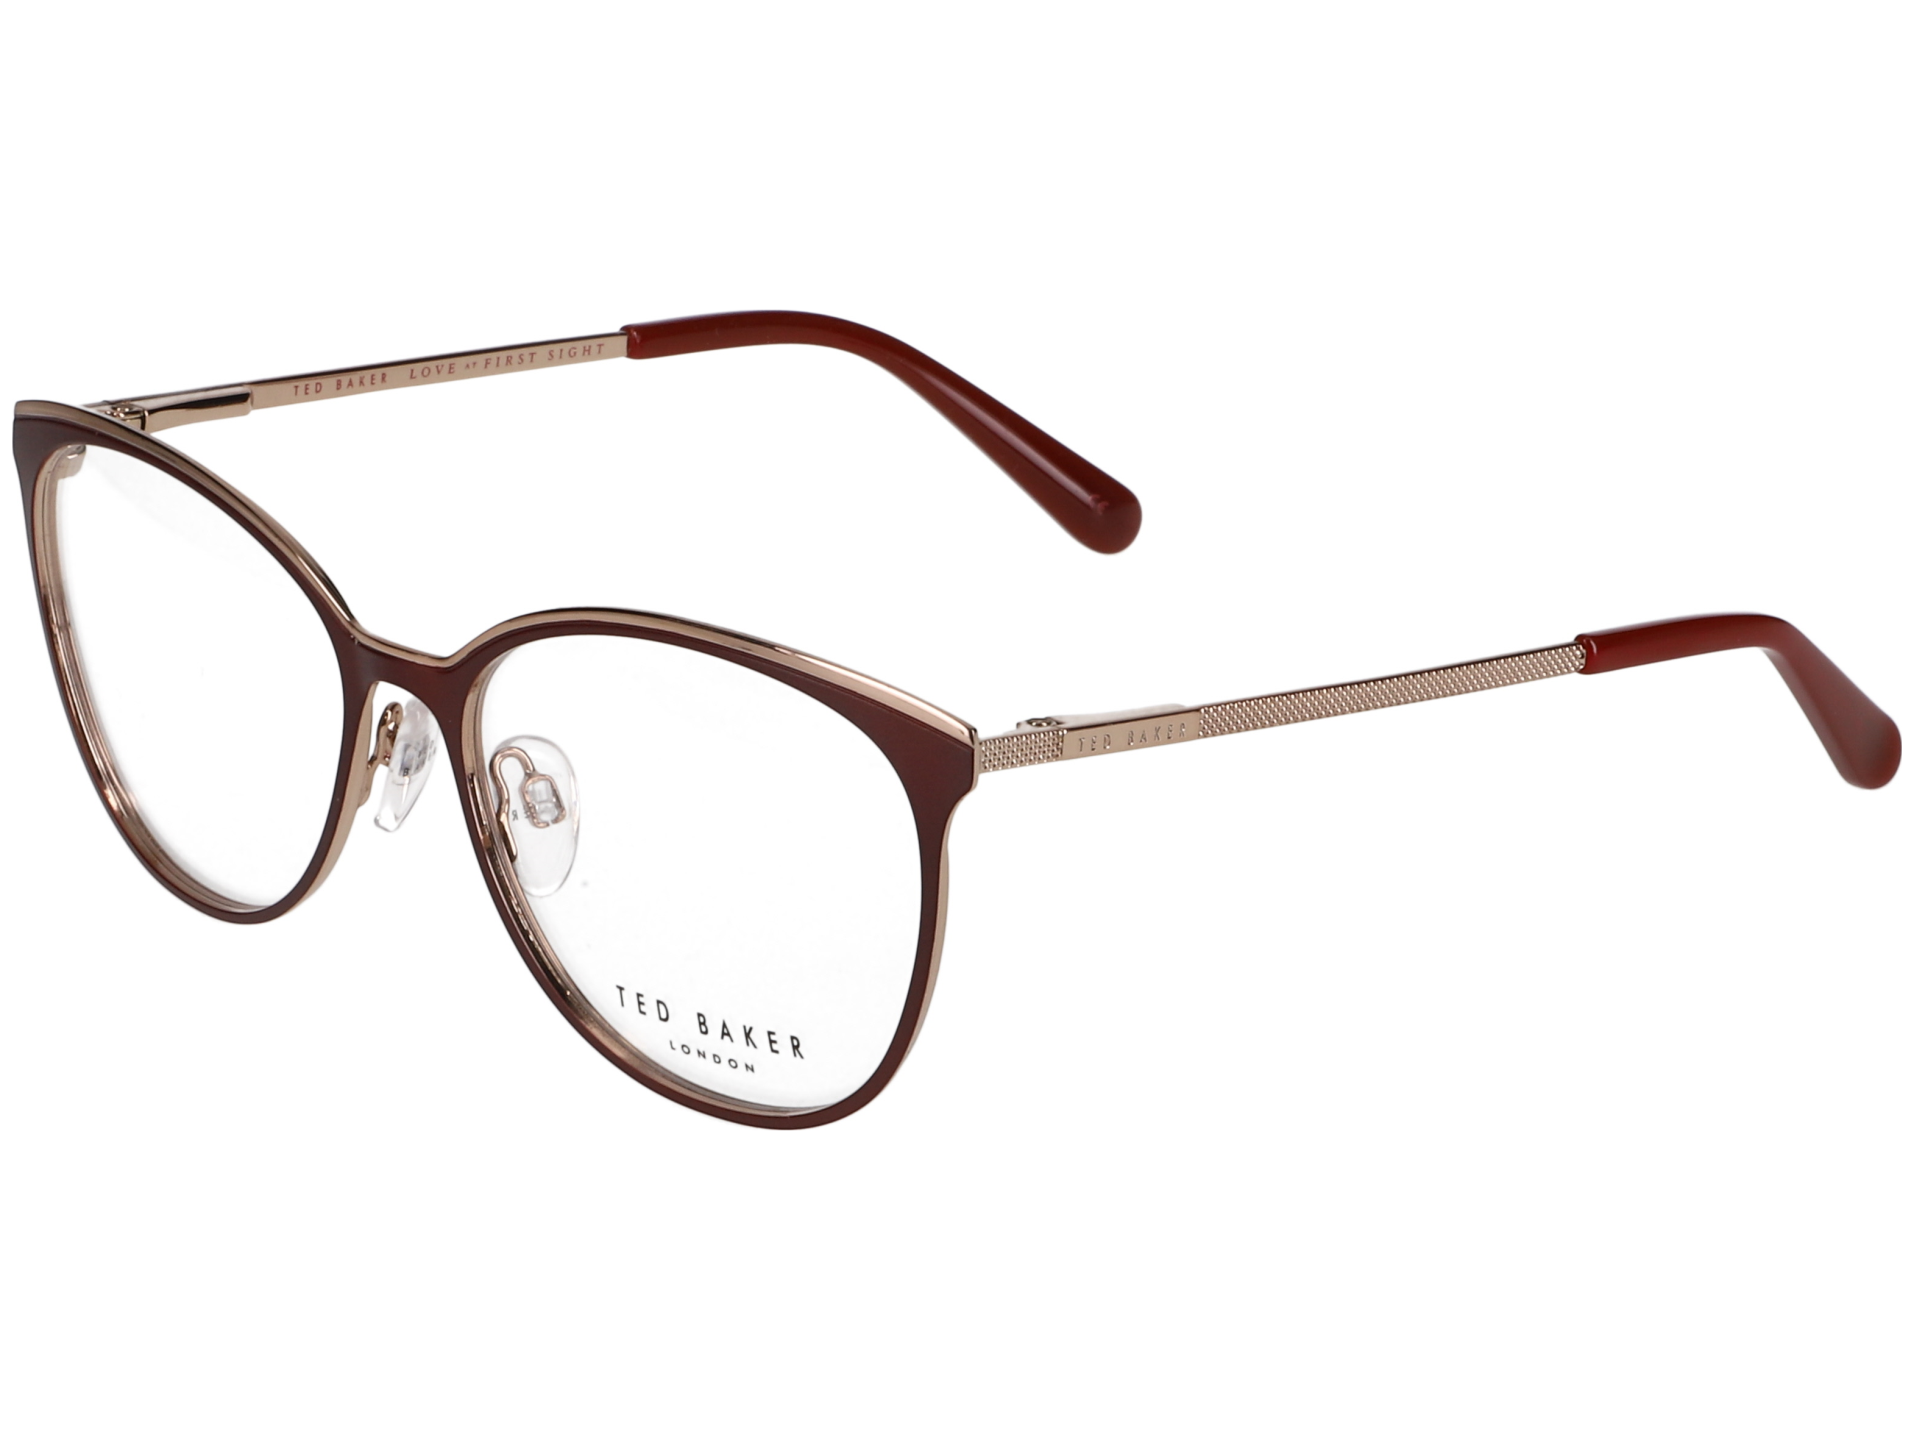 Ted Baker Brille 2237 244 55 rot